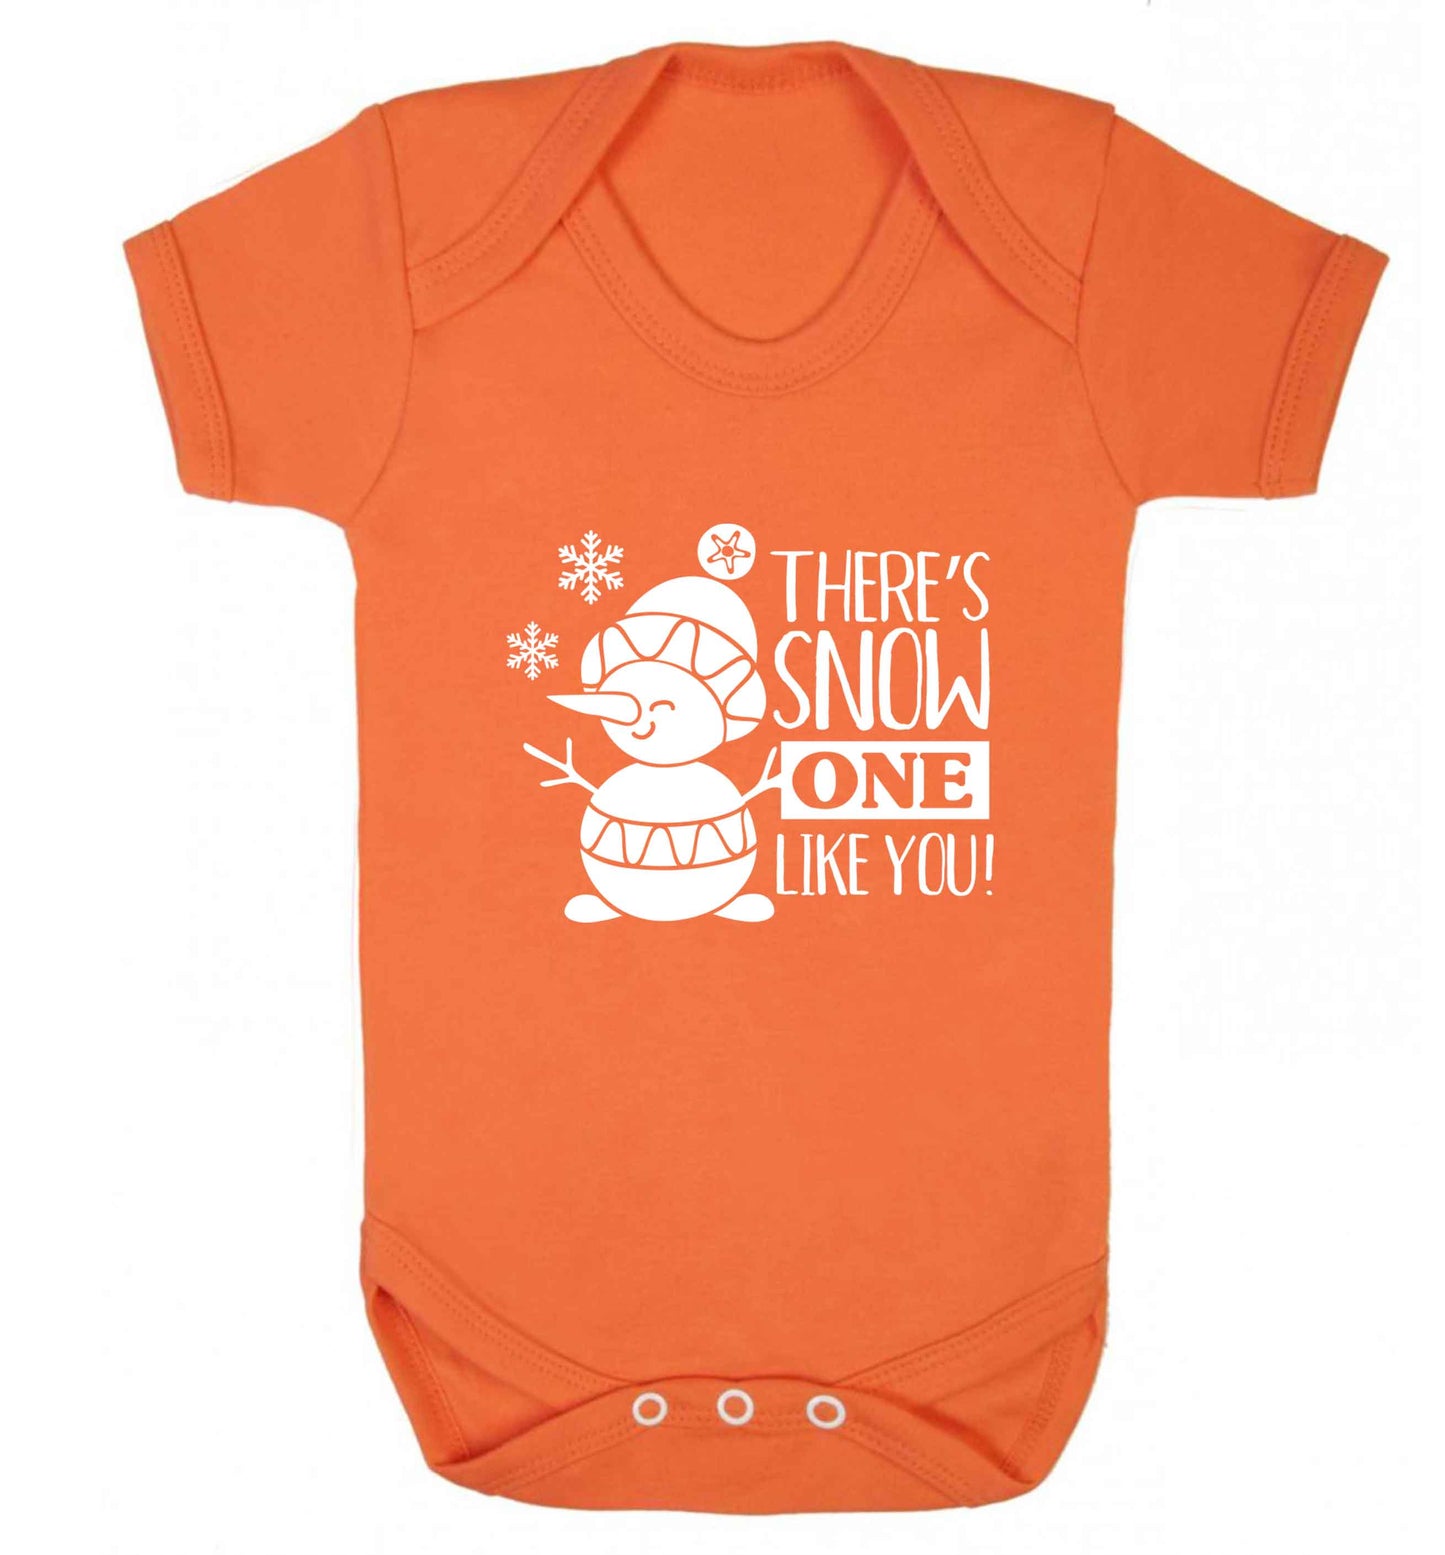 There's snow one like you baby vest orange 18-24 months